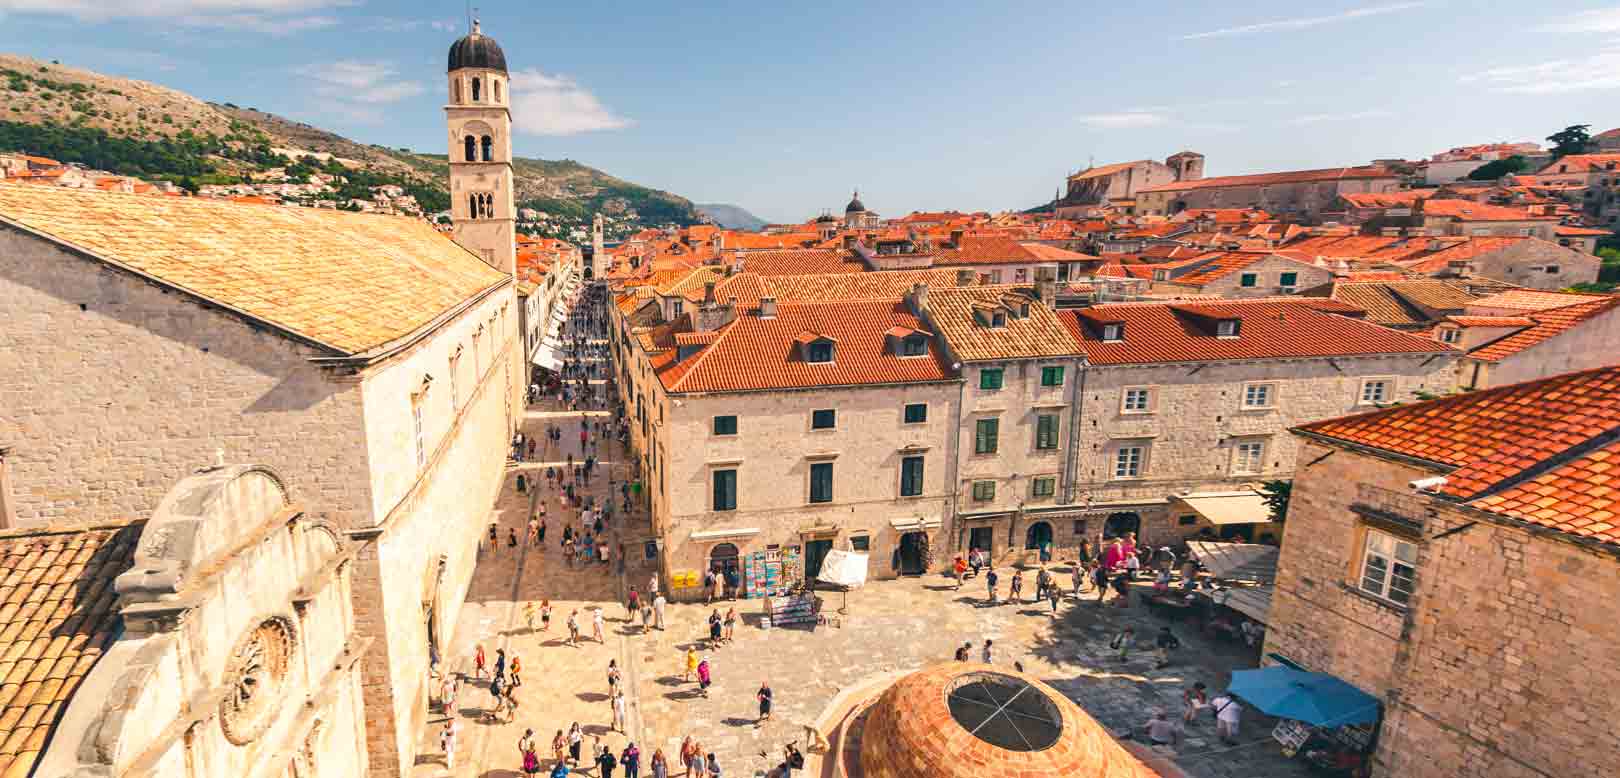 Things to Do in Dubrovnik : Old Town